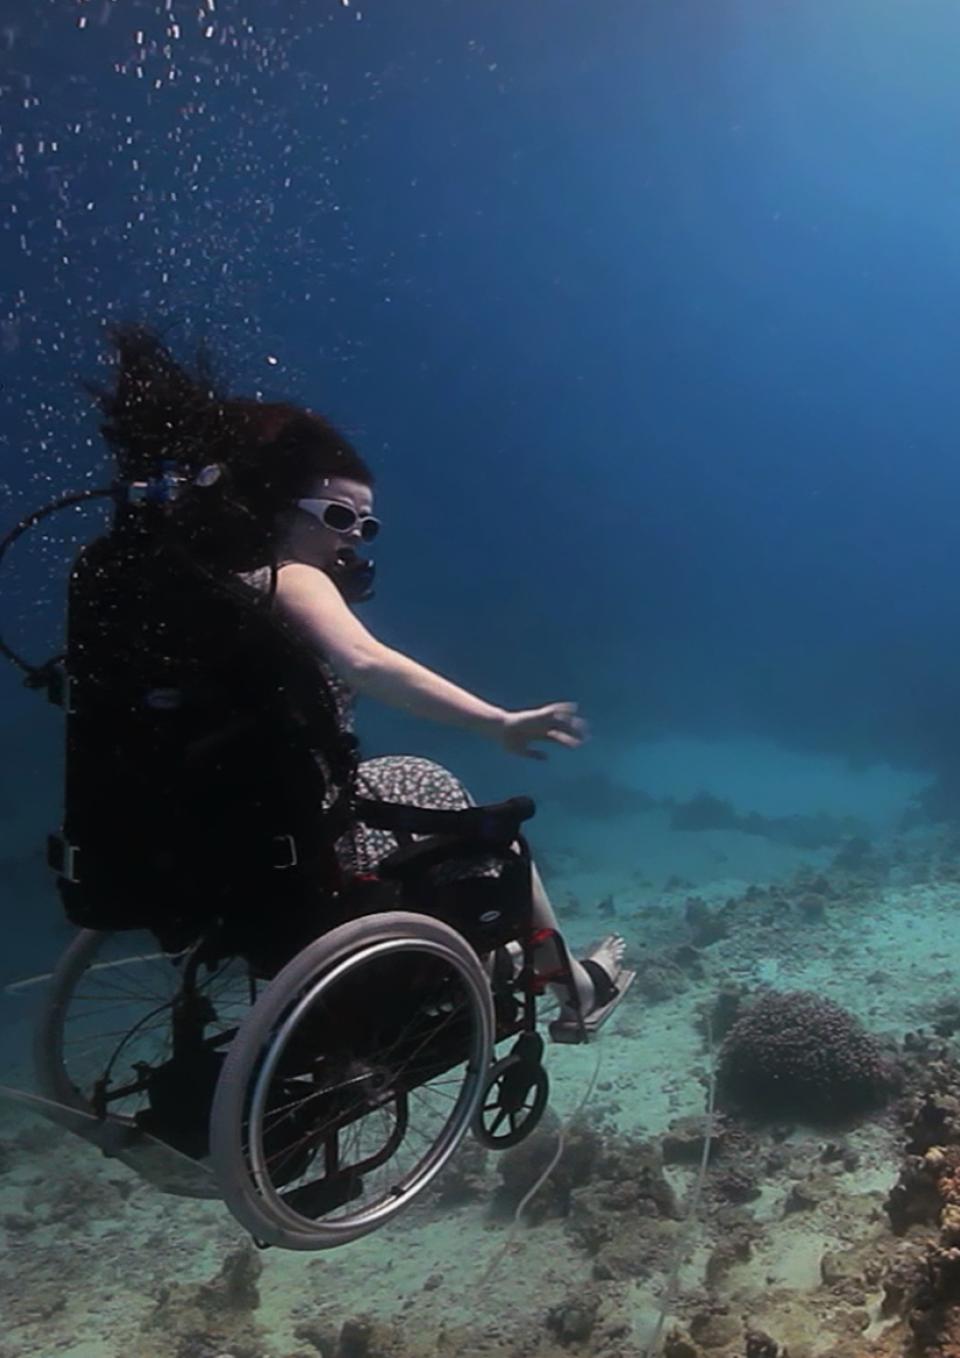 A still from the New Day film Fixed: The Science of Human Enhancement. A woman in a wheelchair is scuba diving. She floats slightly above the ocean floor. Her arms are bare and she does not appear to be wearing full scuba gear other than small goggles. Her hair drifts up in the water and she holds her arms out to the side for balance.